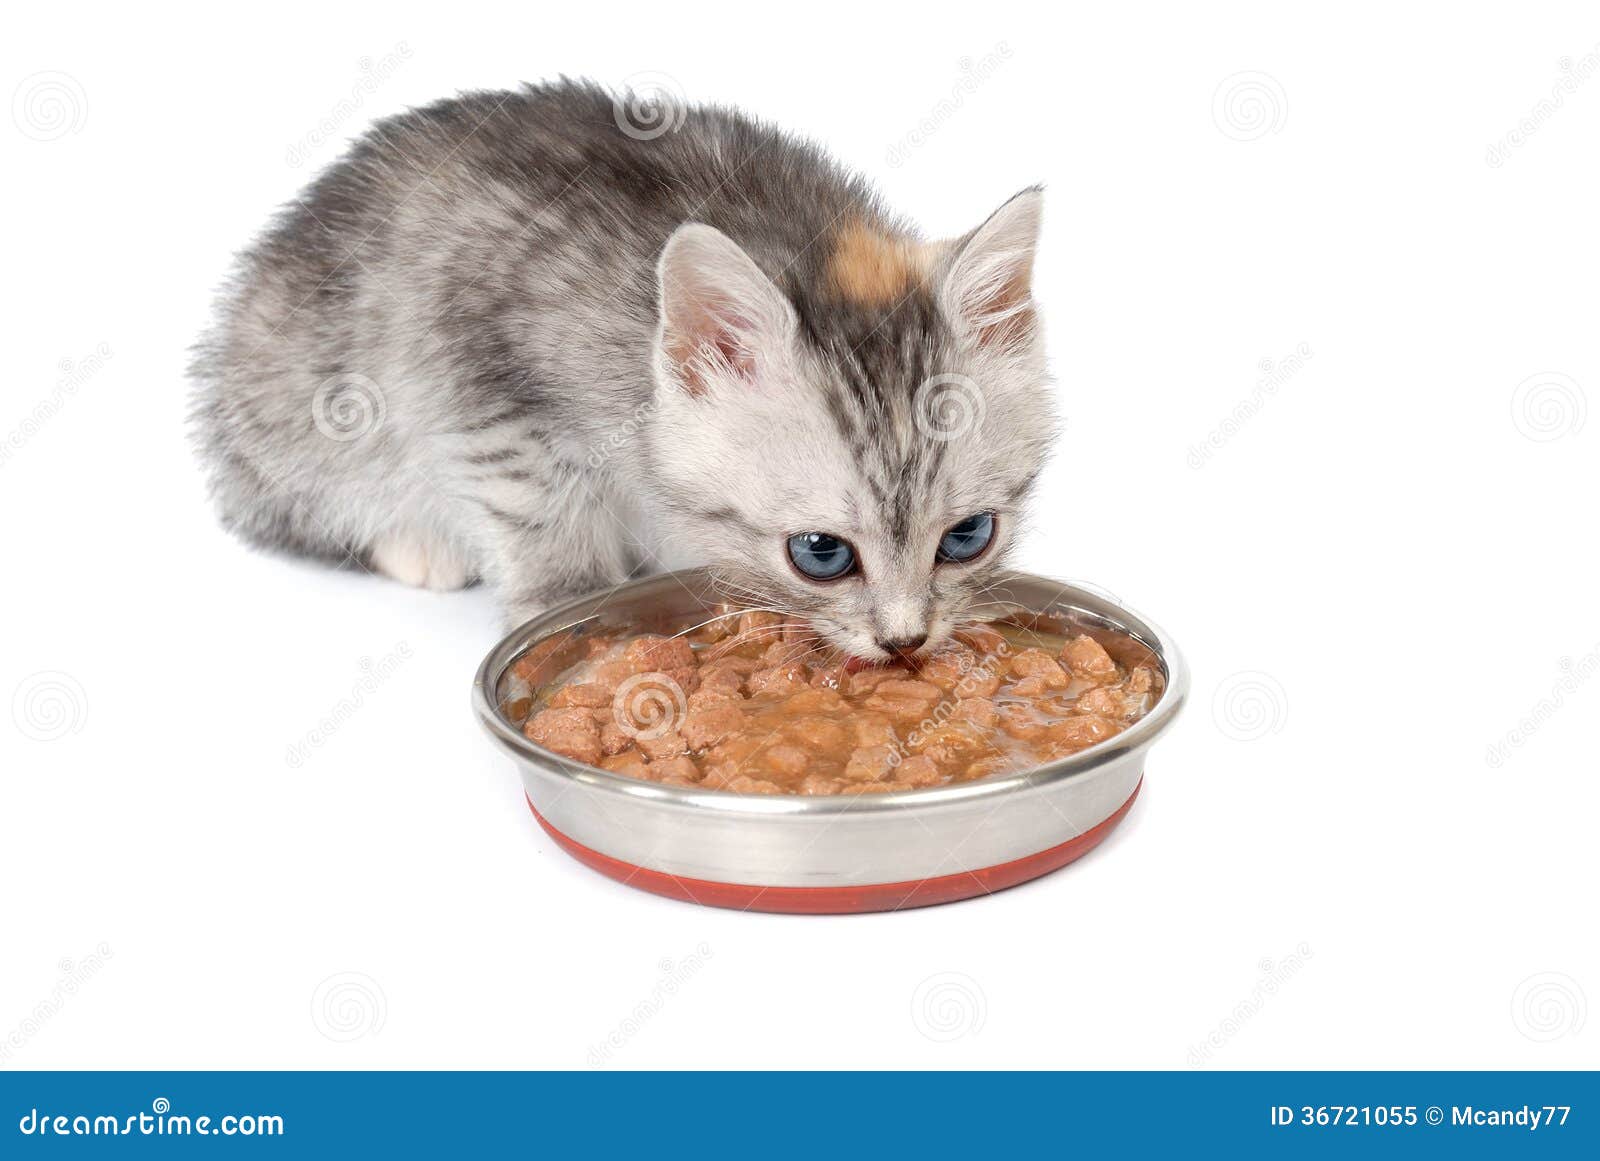 Gray Kitten Eats from a Bowl Stock Image - Image of beautiful, furry ...